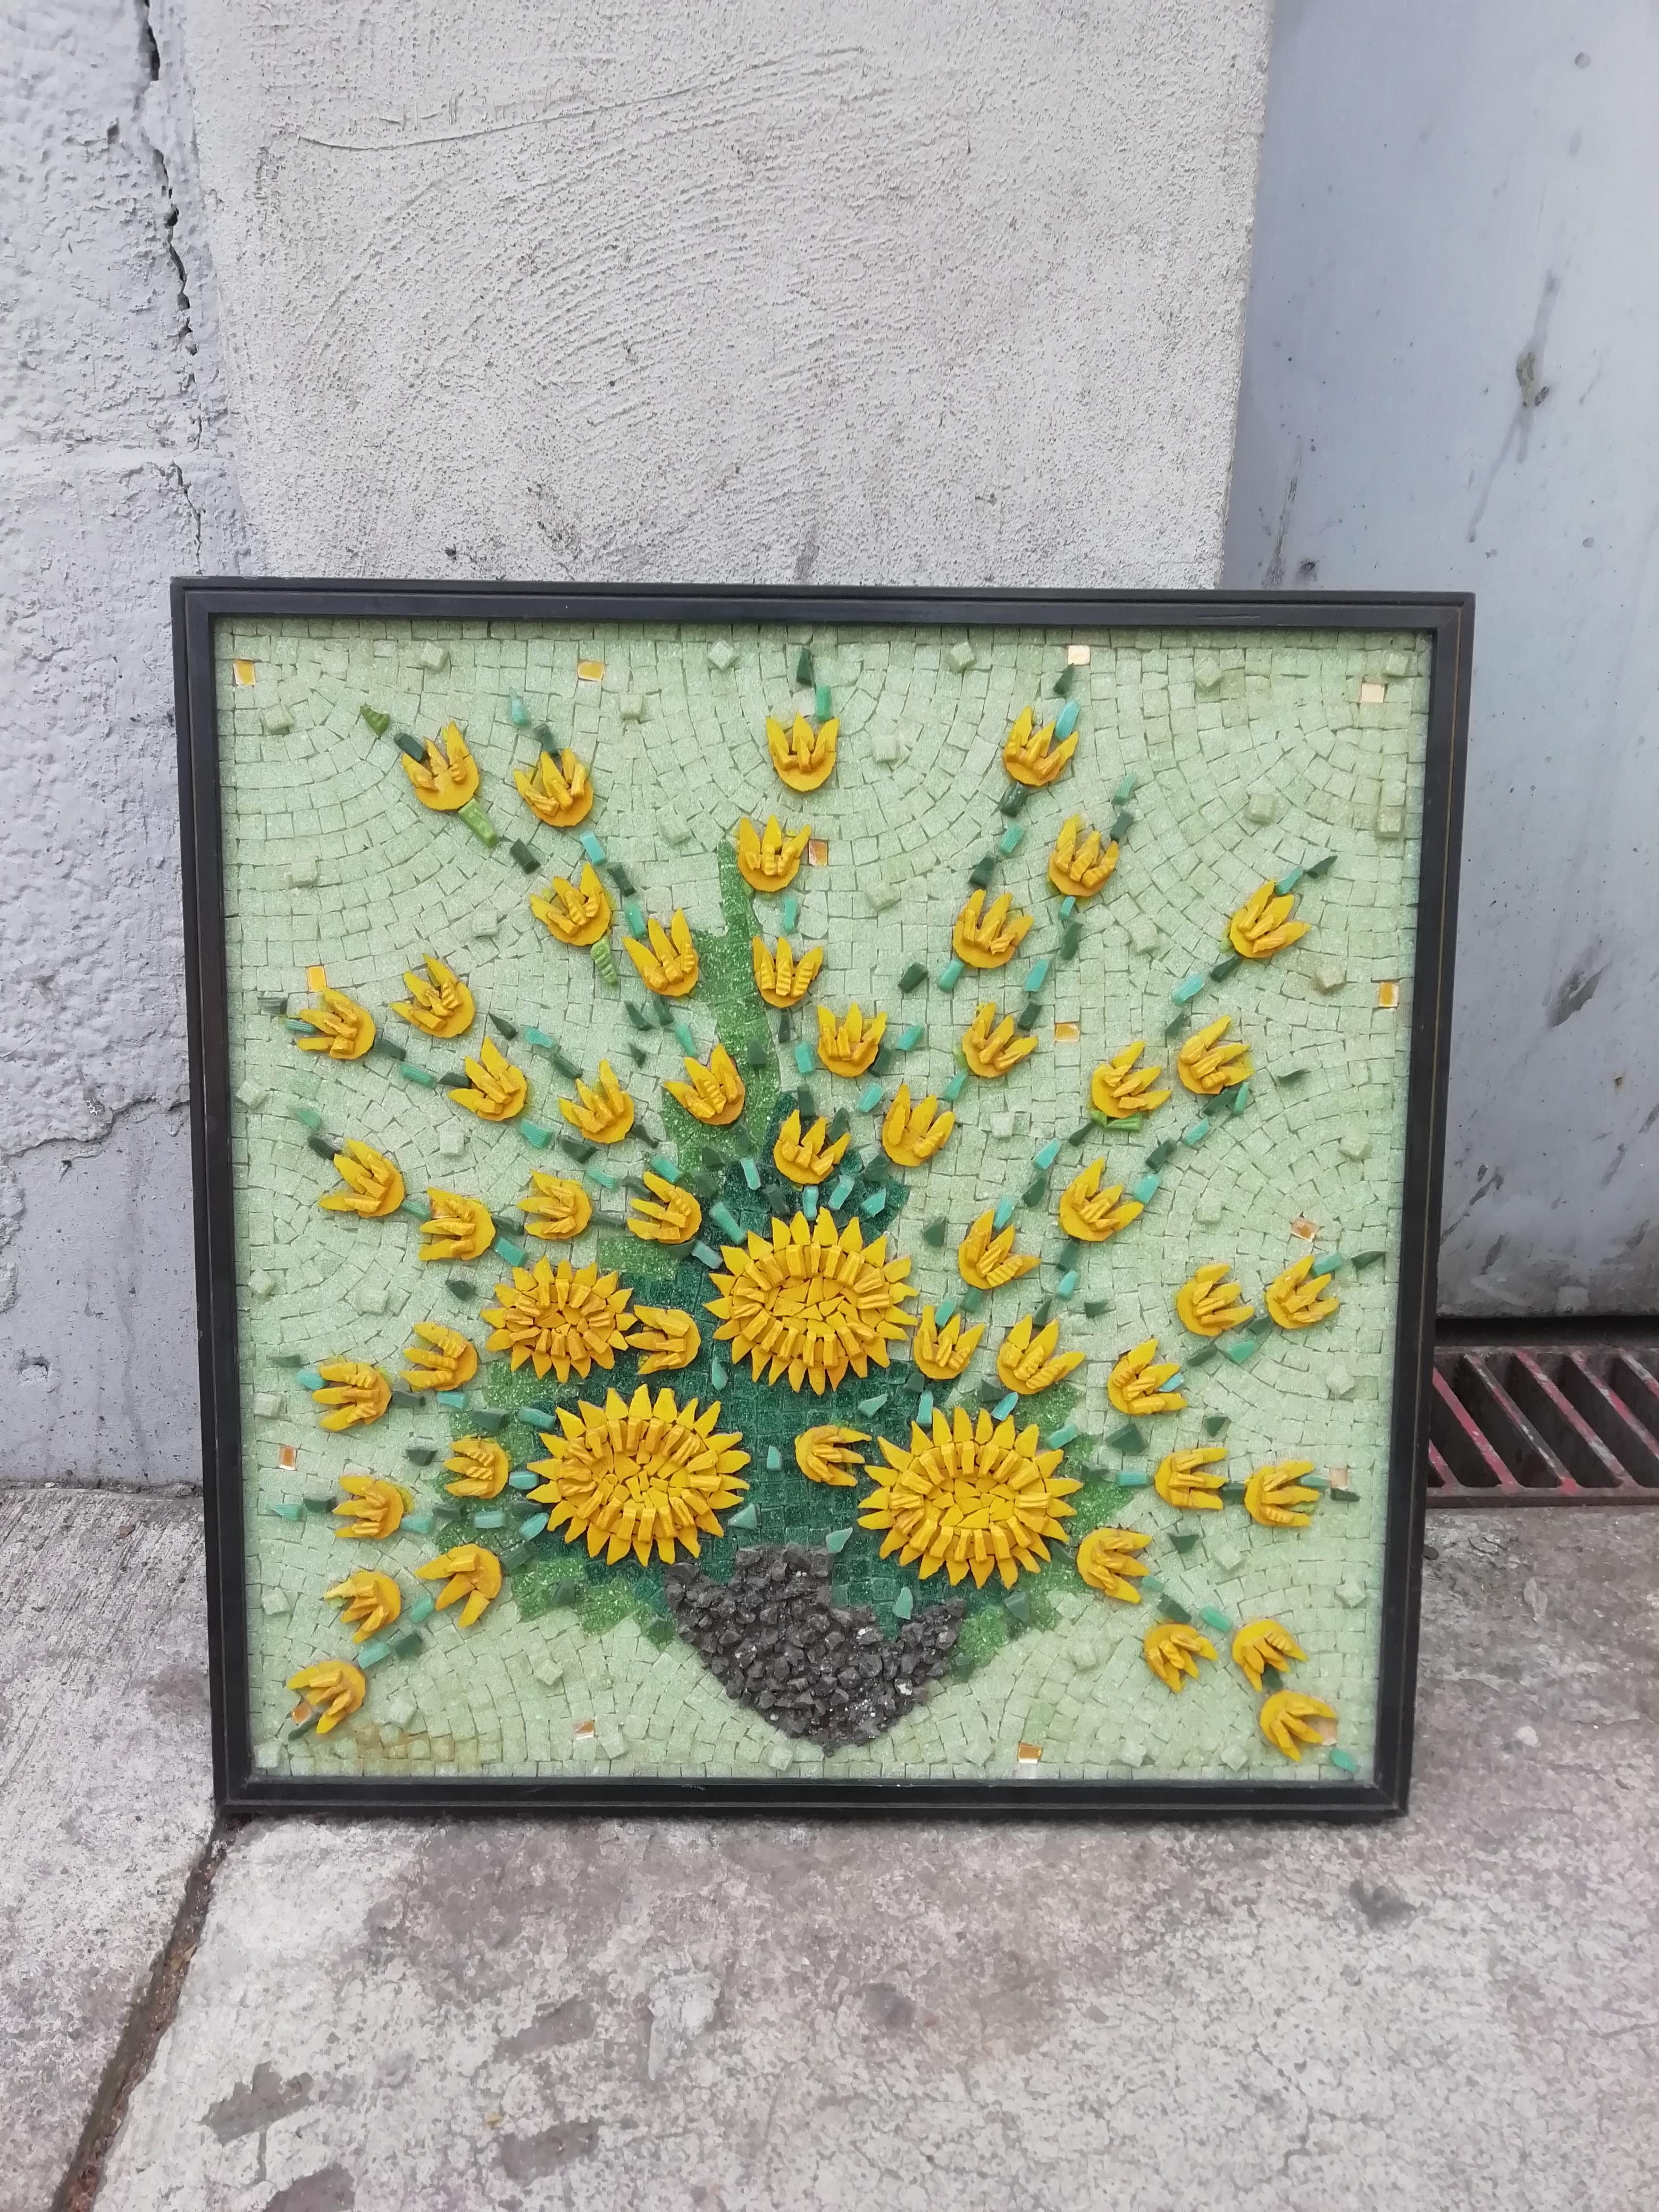 Rare and beautiful Mexican Mid-Century Modern mosaic by Genaro Alvarez depicting a yellow chrysanthemum still life over a pale green background. The mosaic is mounted over a wood board that carries the artist's signature and seal.